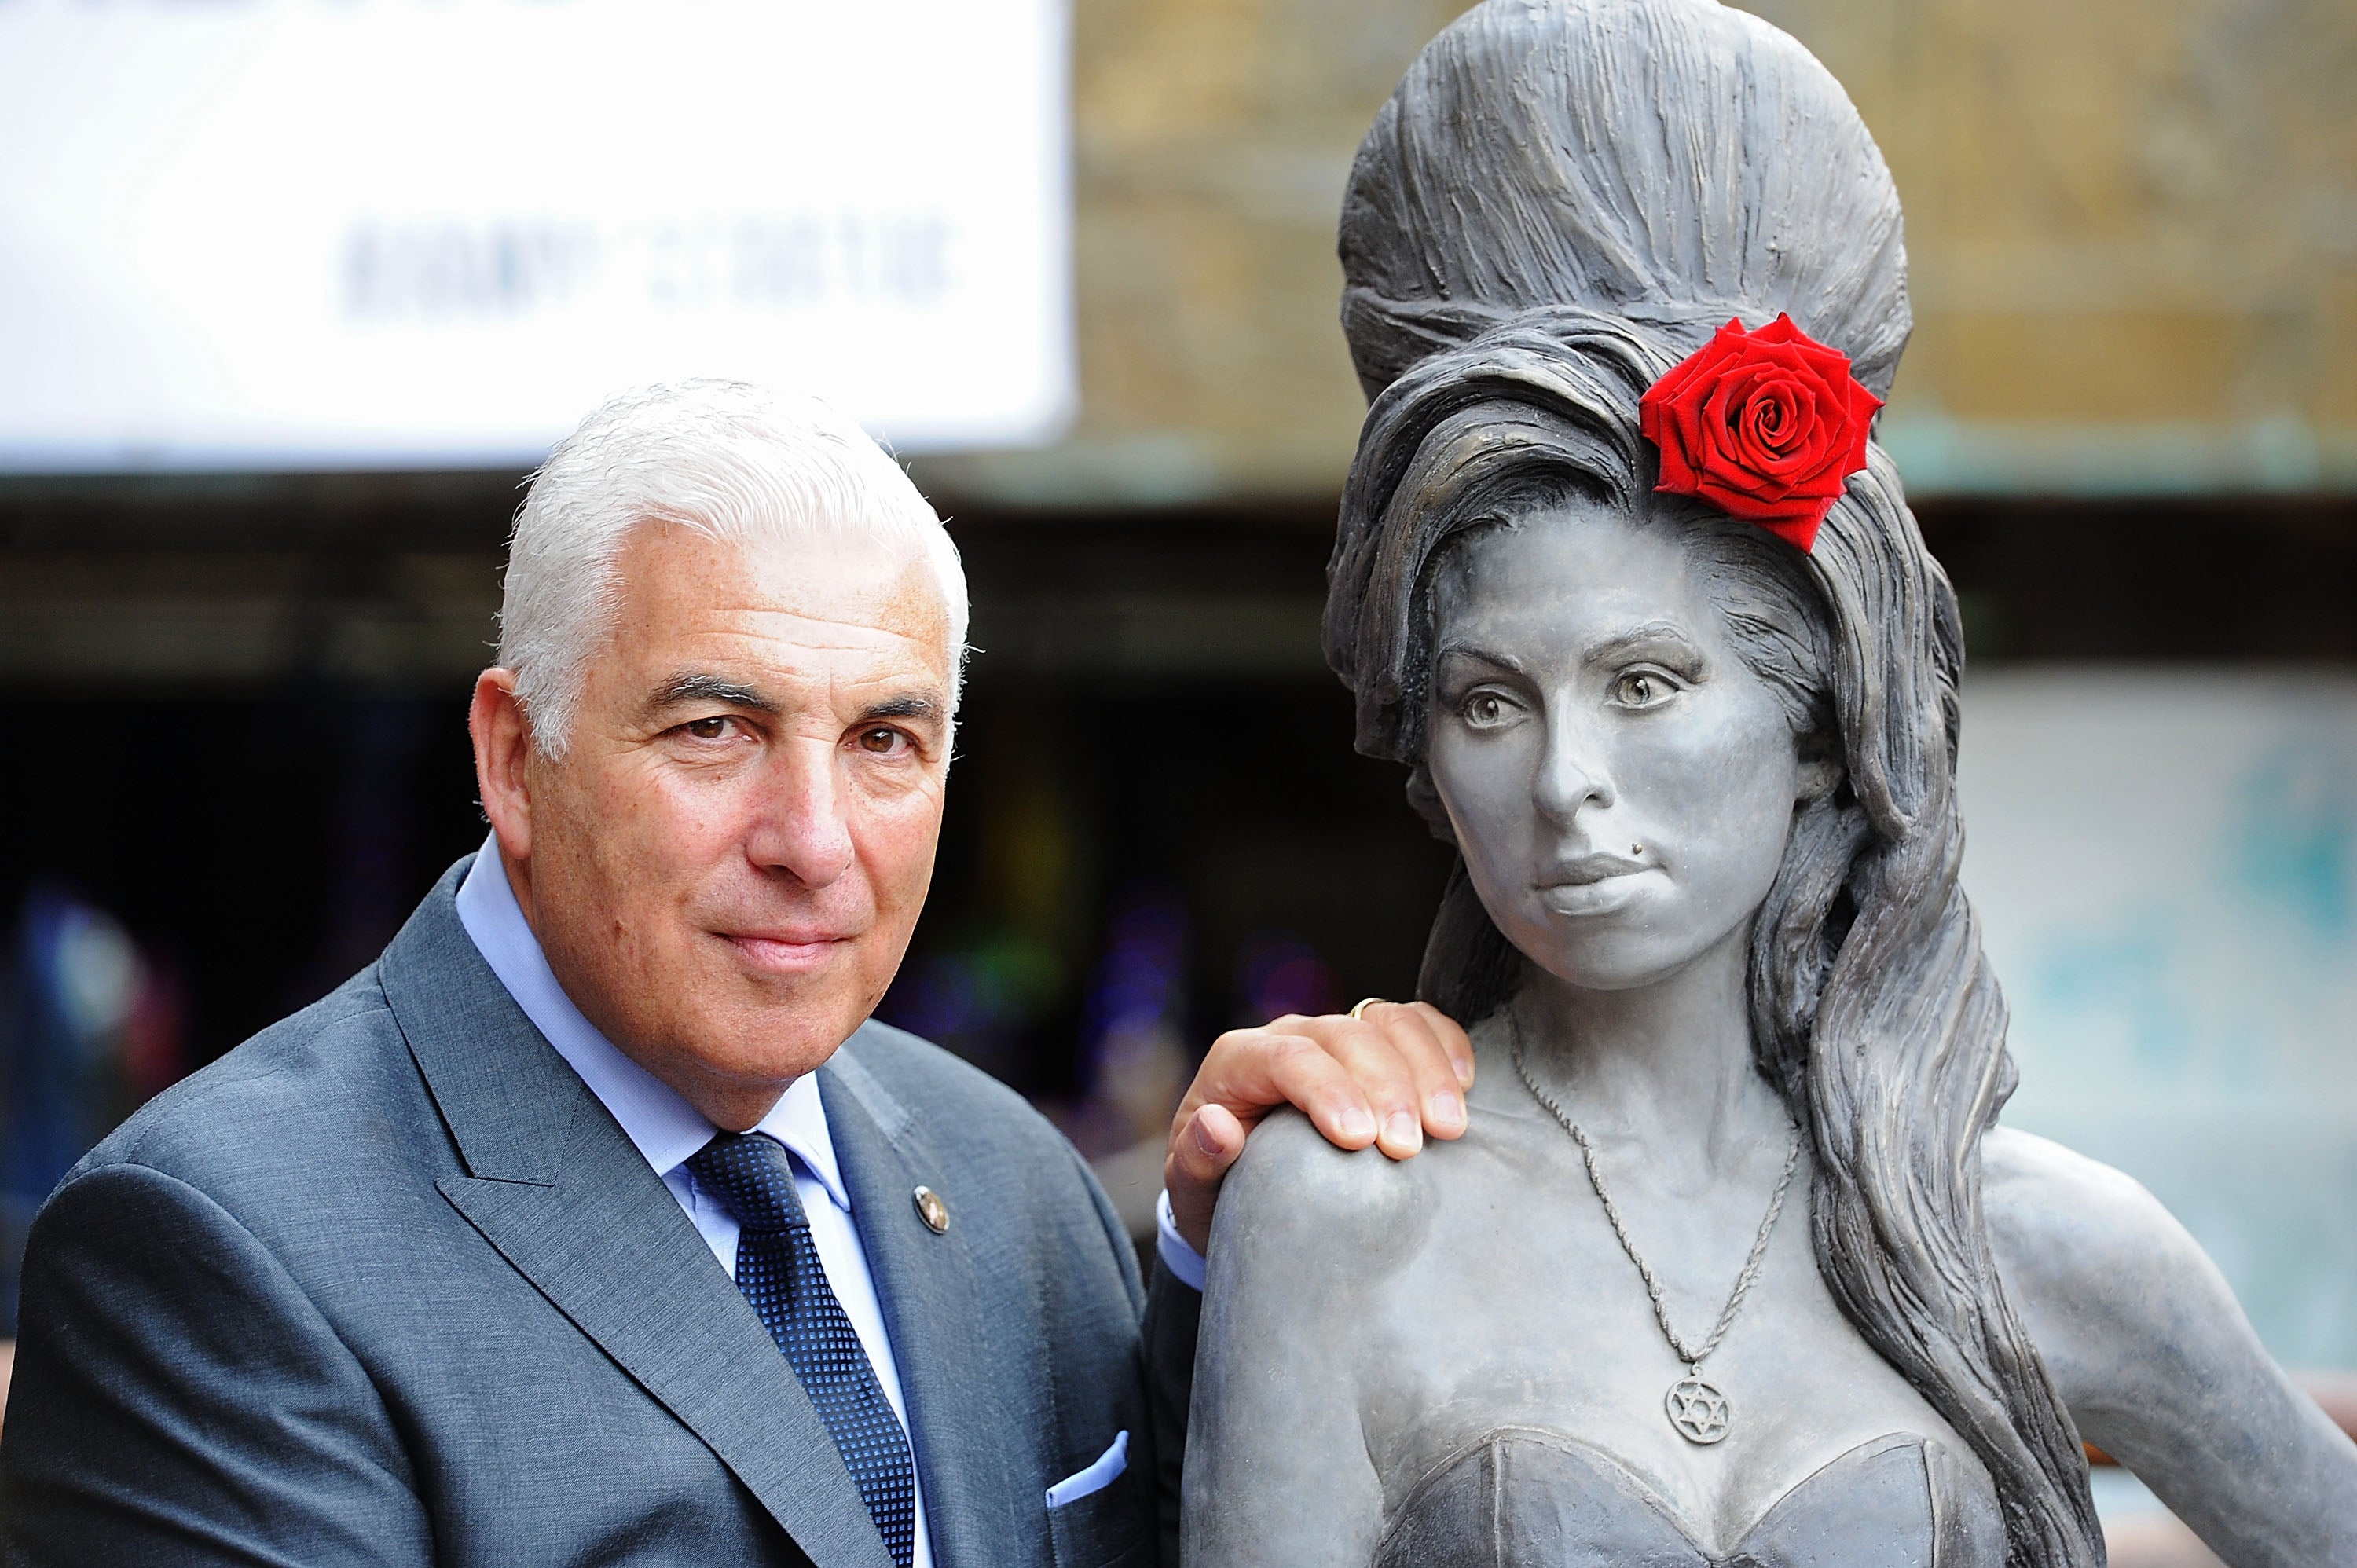 Mitch Winehouse has admitted he made mistakes with Amy